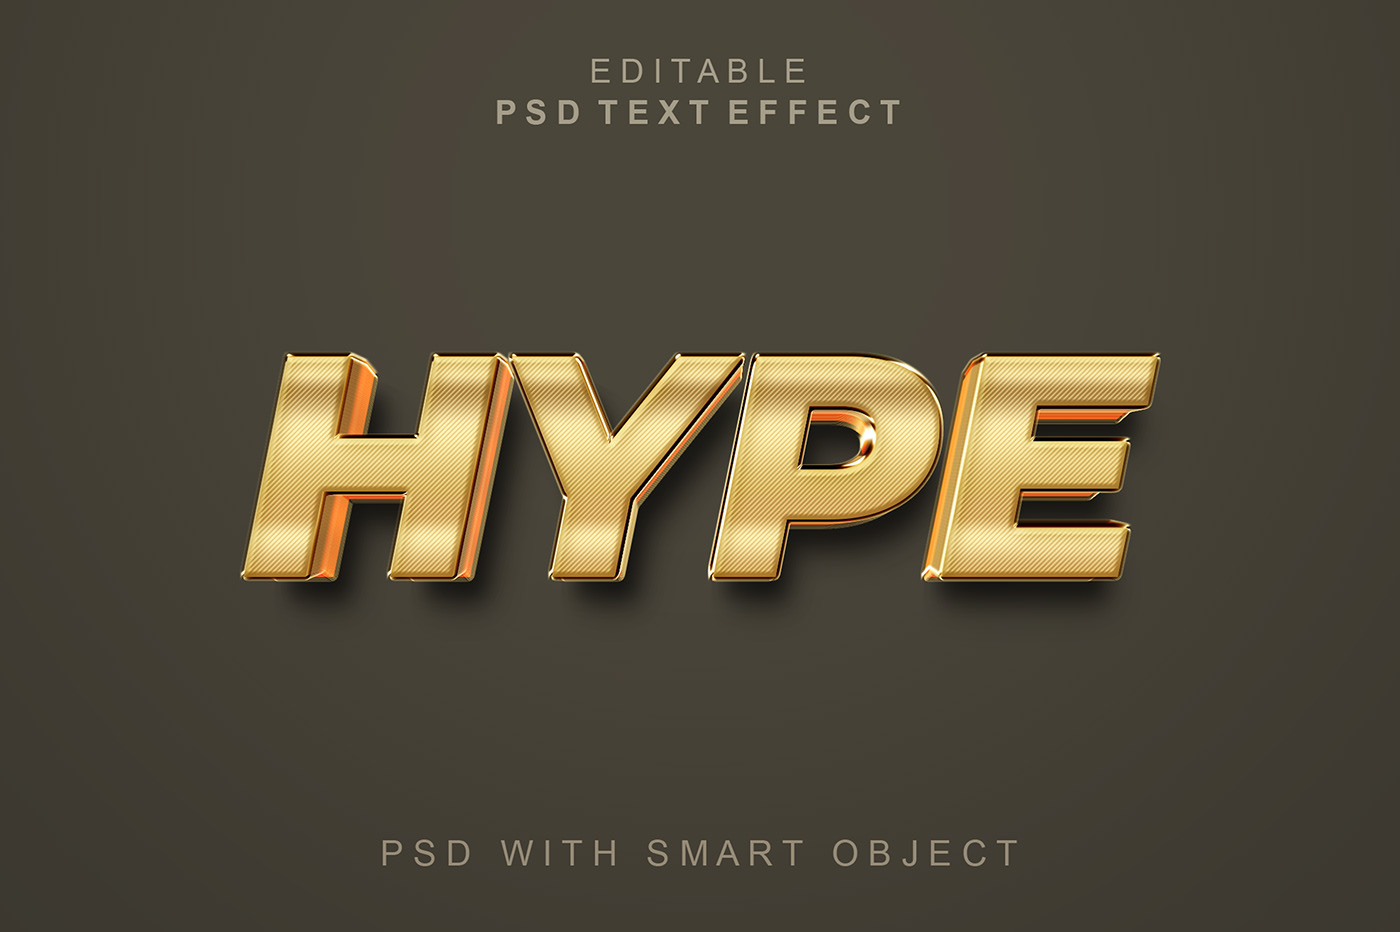 3D text 3d text effect action actions effect hype logo type logos text text effect